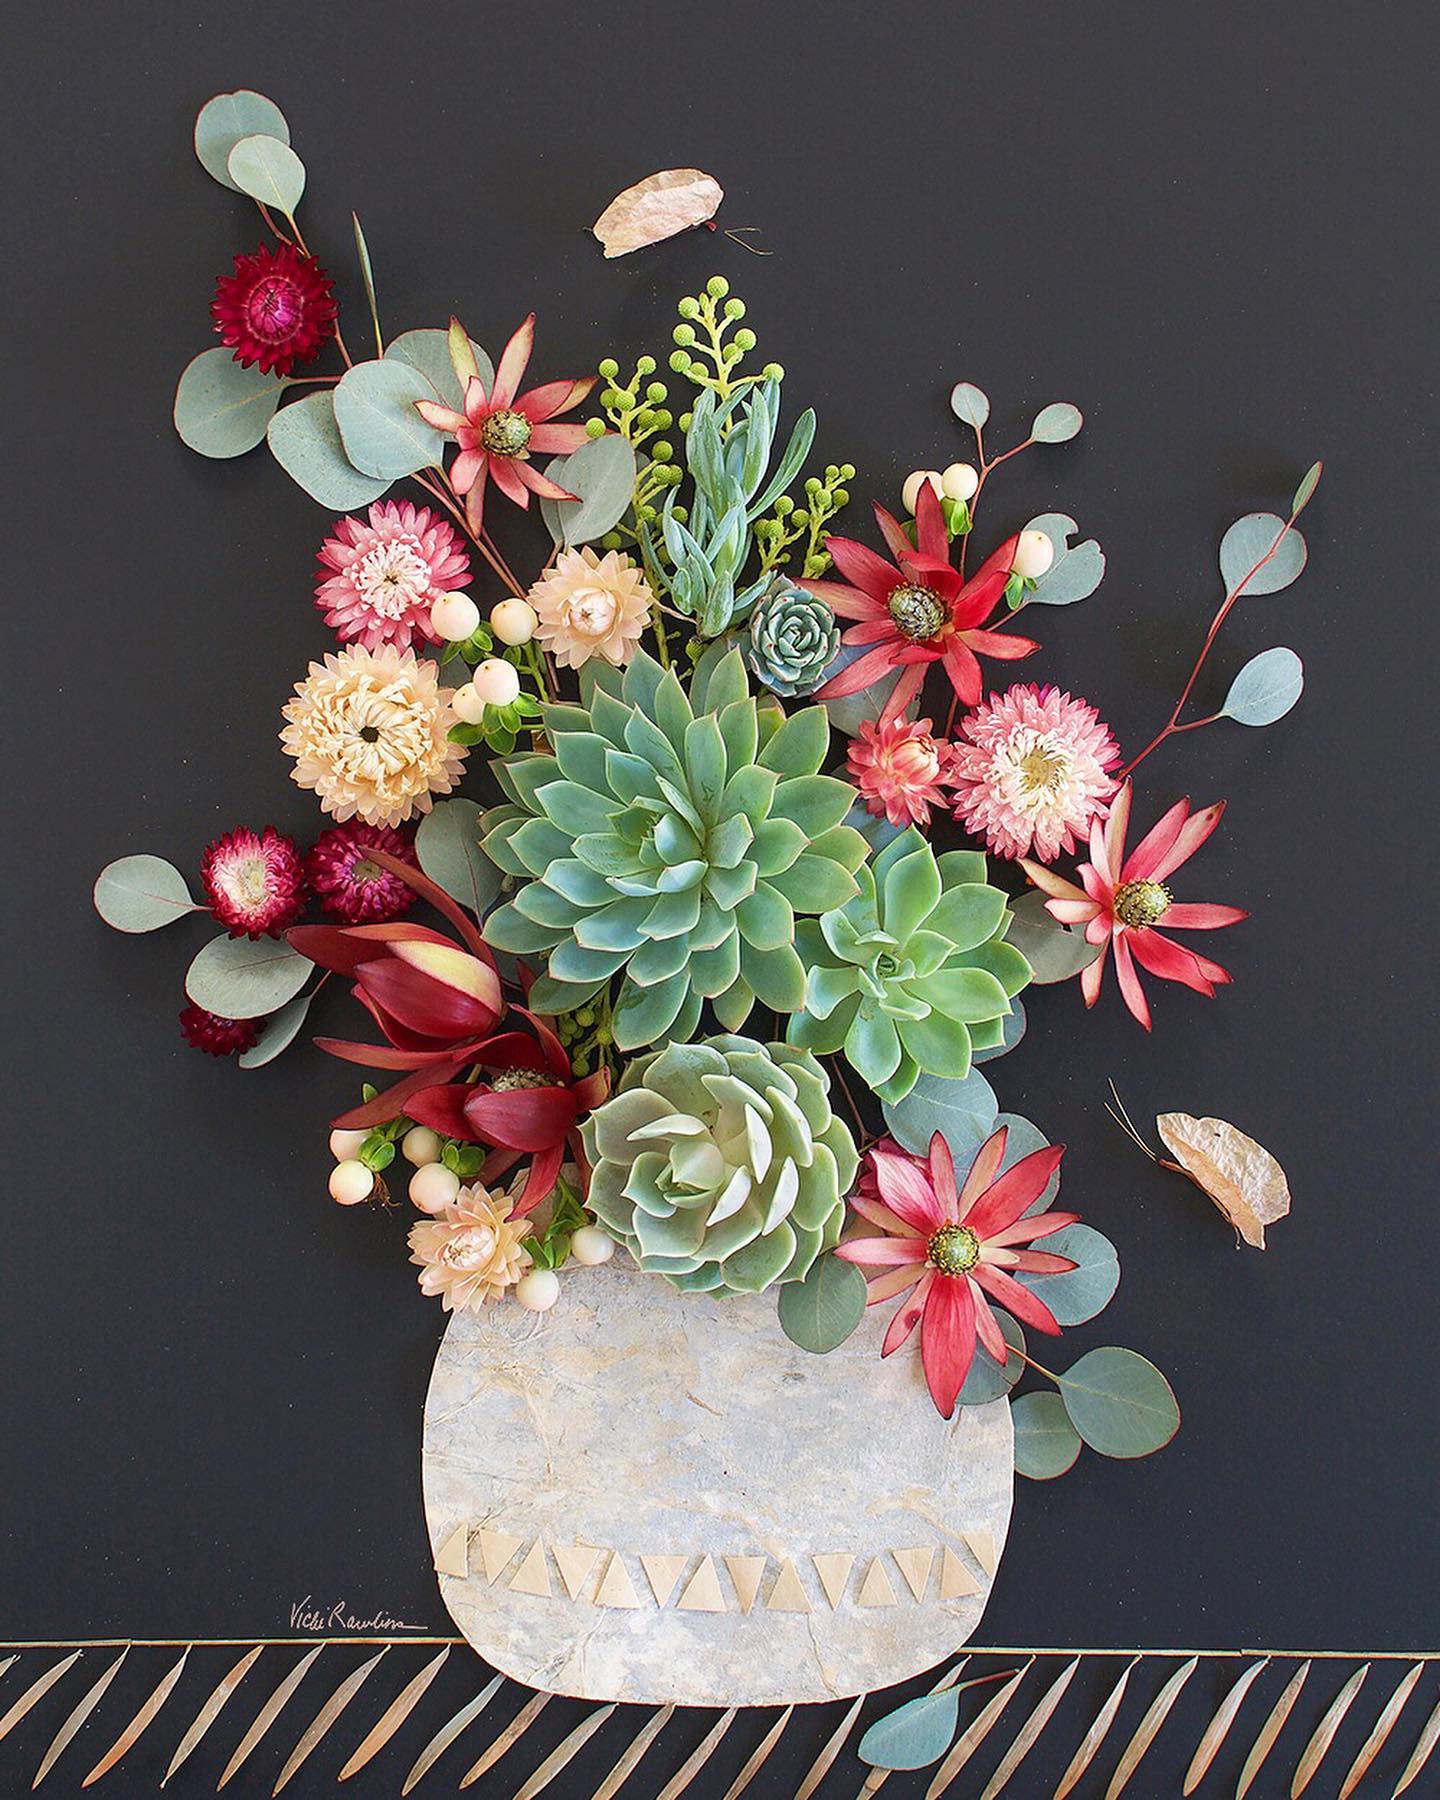 Blossoms and Twigs Are Turned Into Stunning Floral Compositions010